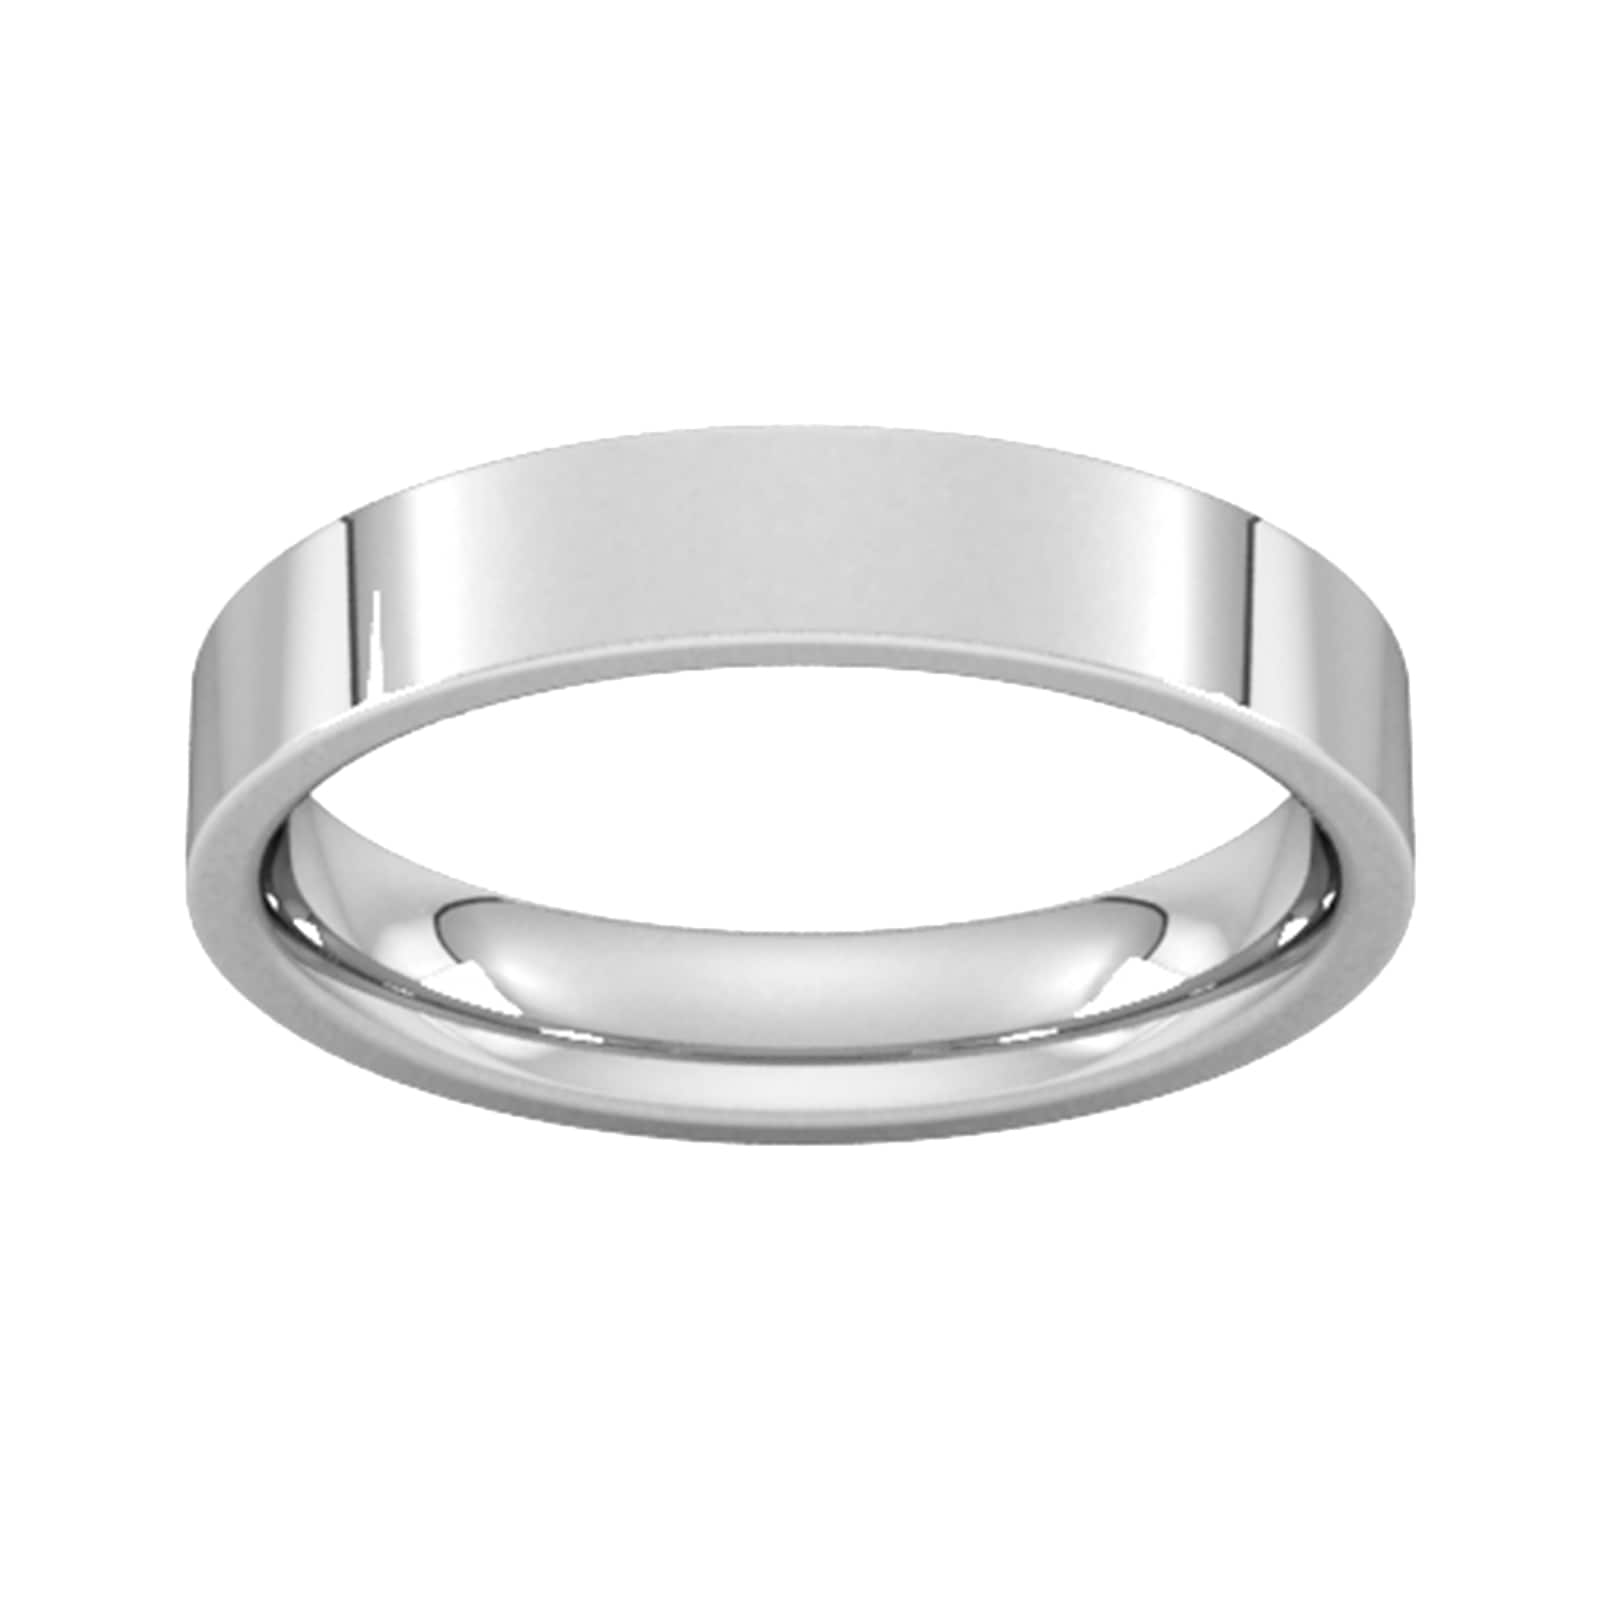 4mm Flat Court Heavy Wedding Ring In Sterling Silver - Ring Size Q